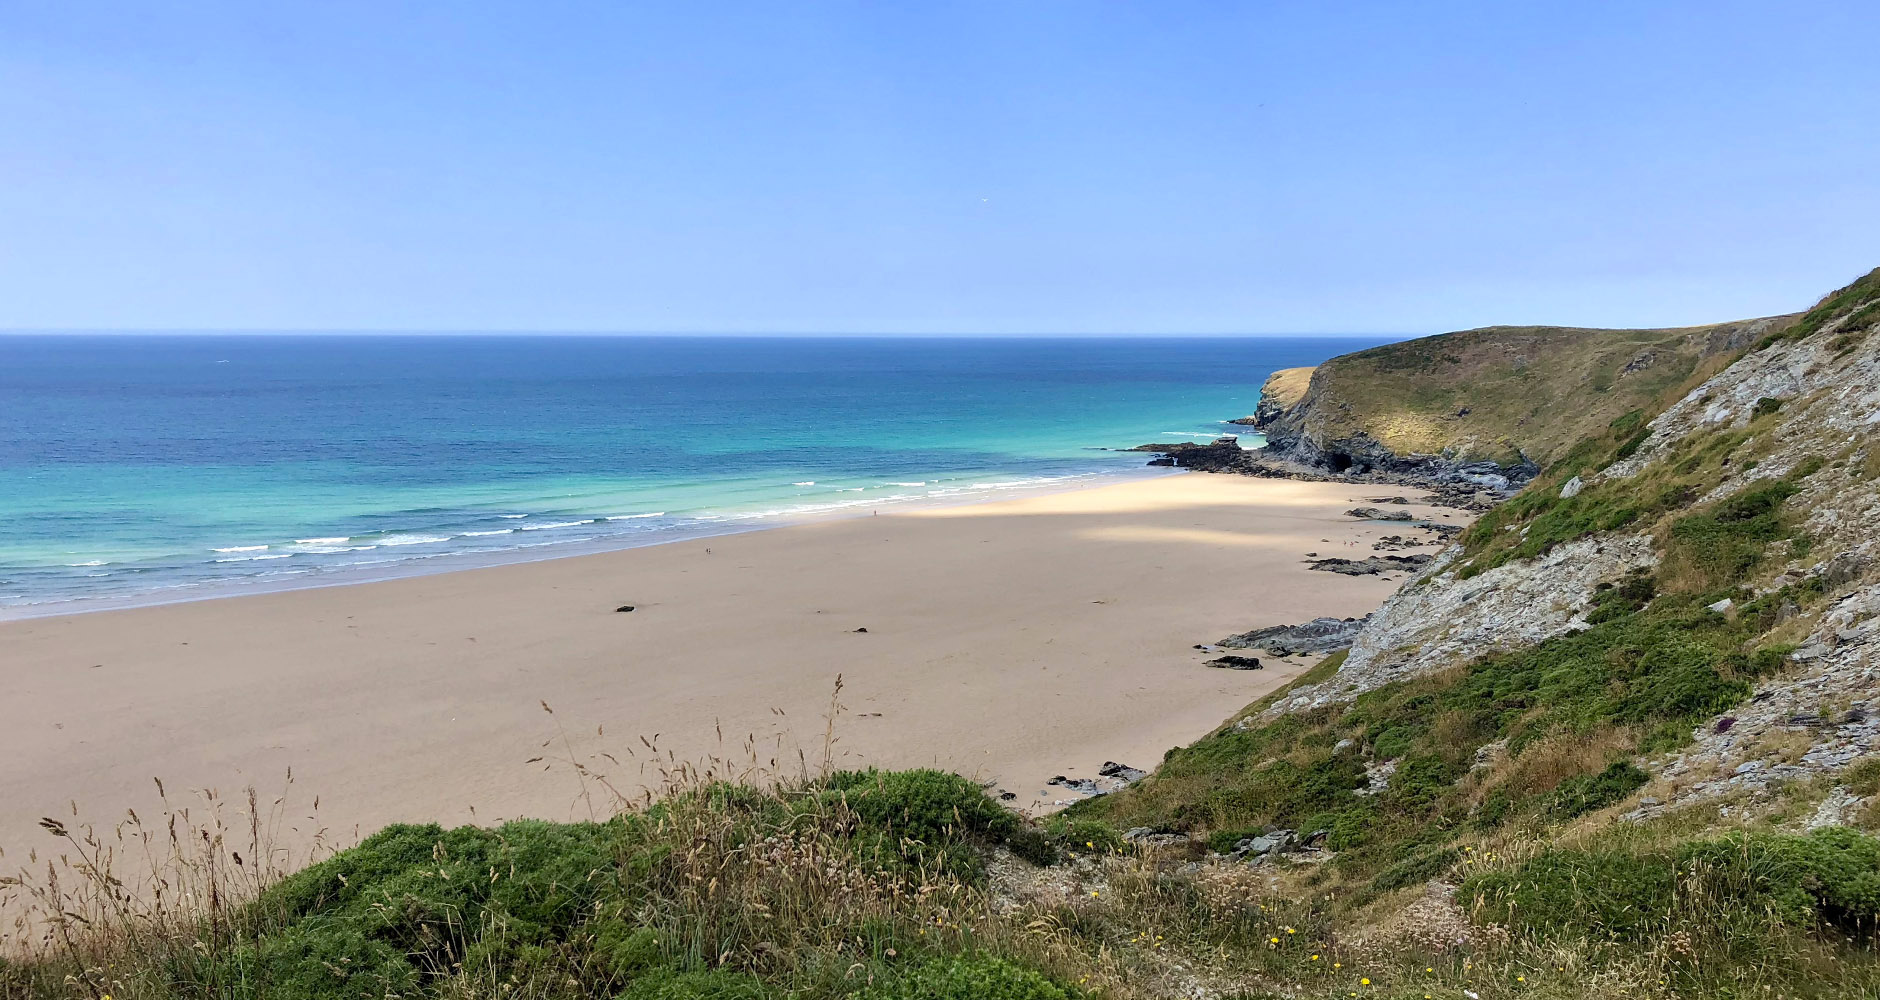 The magnificent beach at Watergate Bay